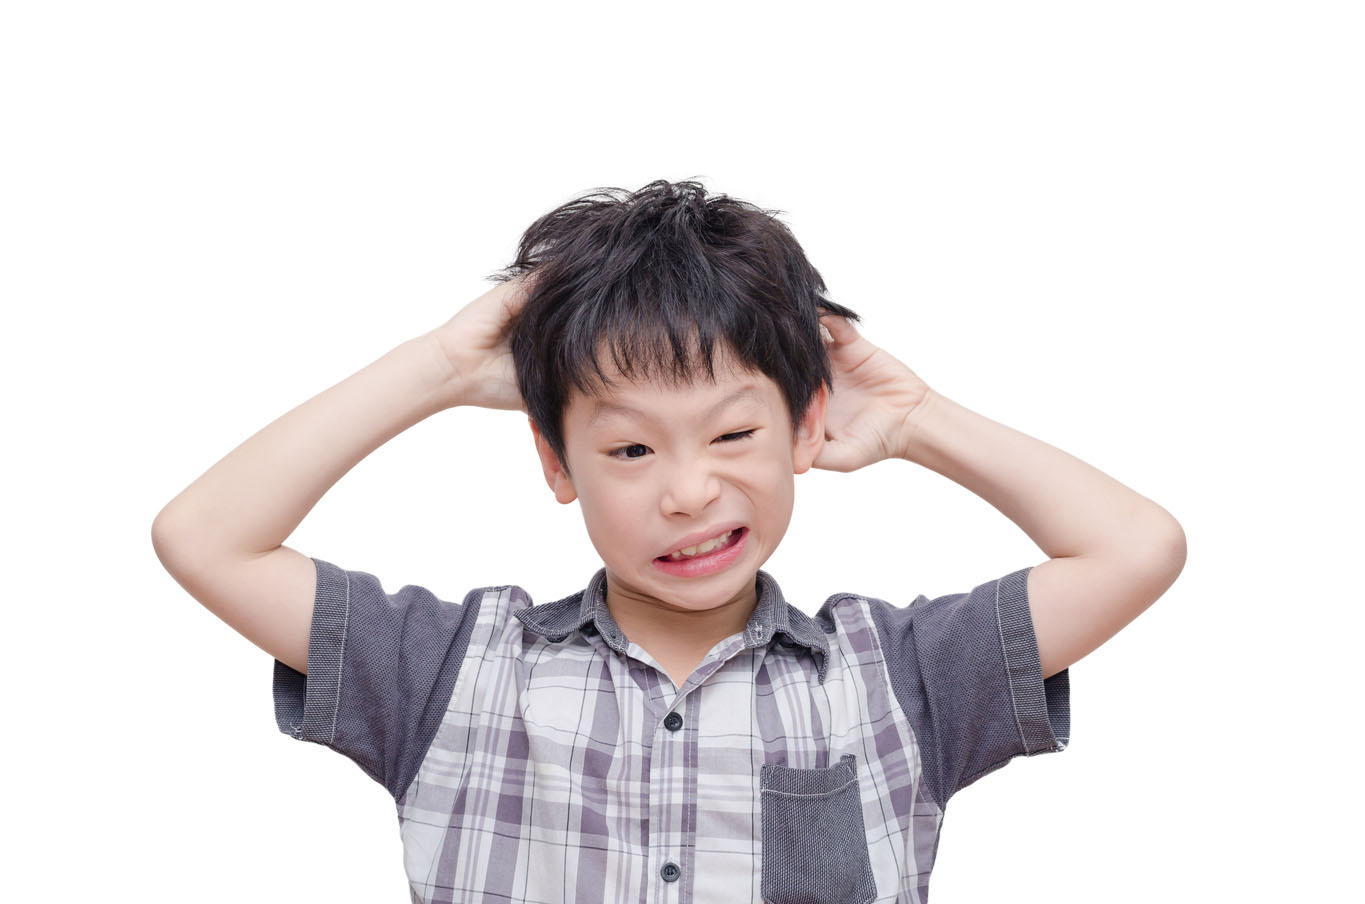 Young boy scratching in his hair and looking uncomfortable